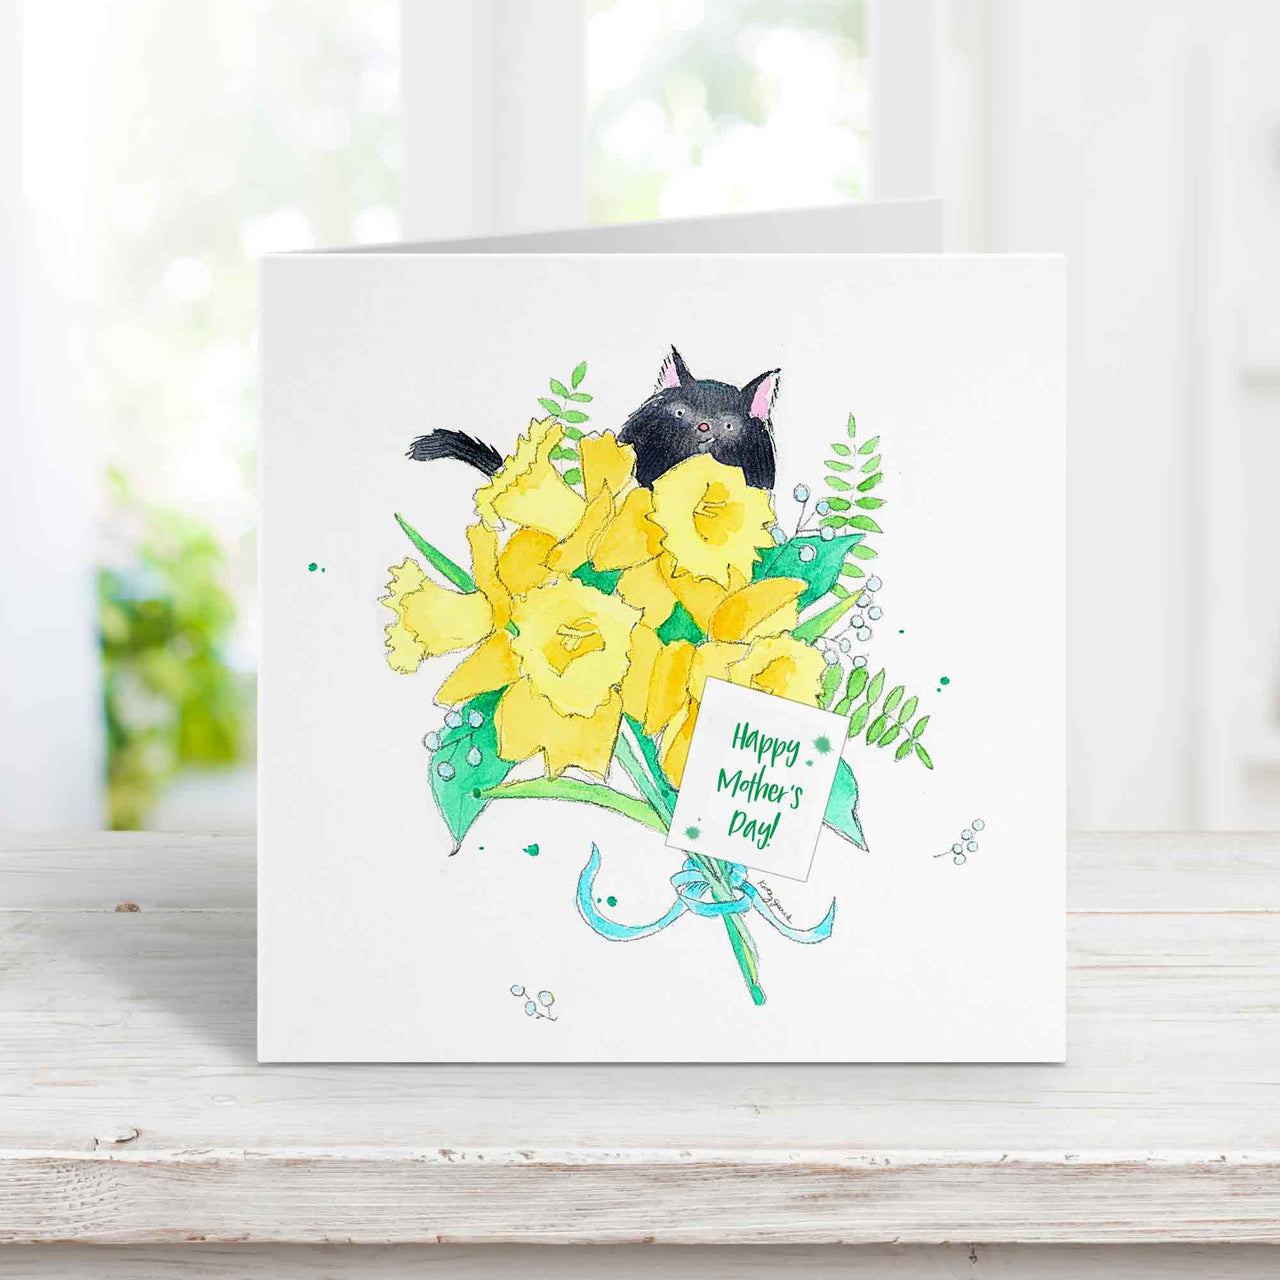 Mothers day card with a whimsical black cat peeking out behind a bouquet of yellow daffodils. There is a small white tag that says Happy Mothers Day.